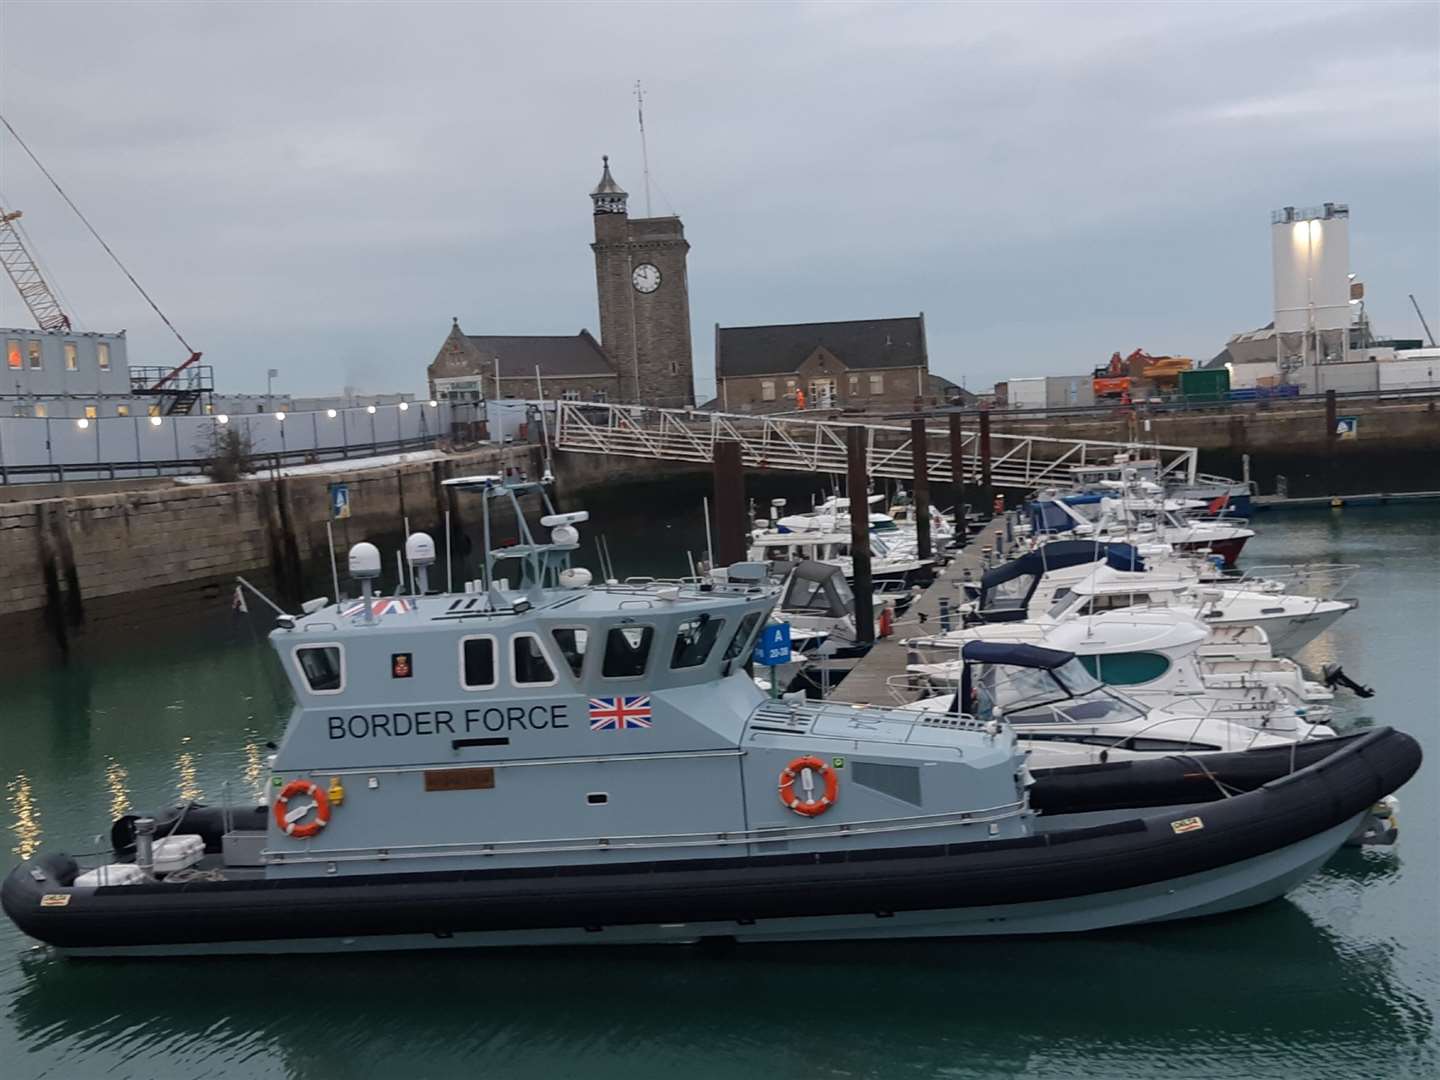 The Border Force has been highly active in the English Channel today, with four illegal boat crossings detected